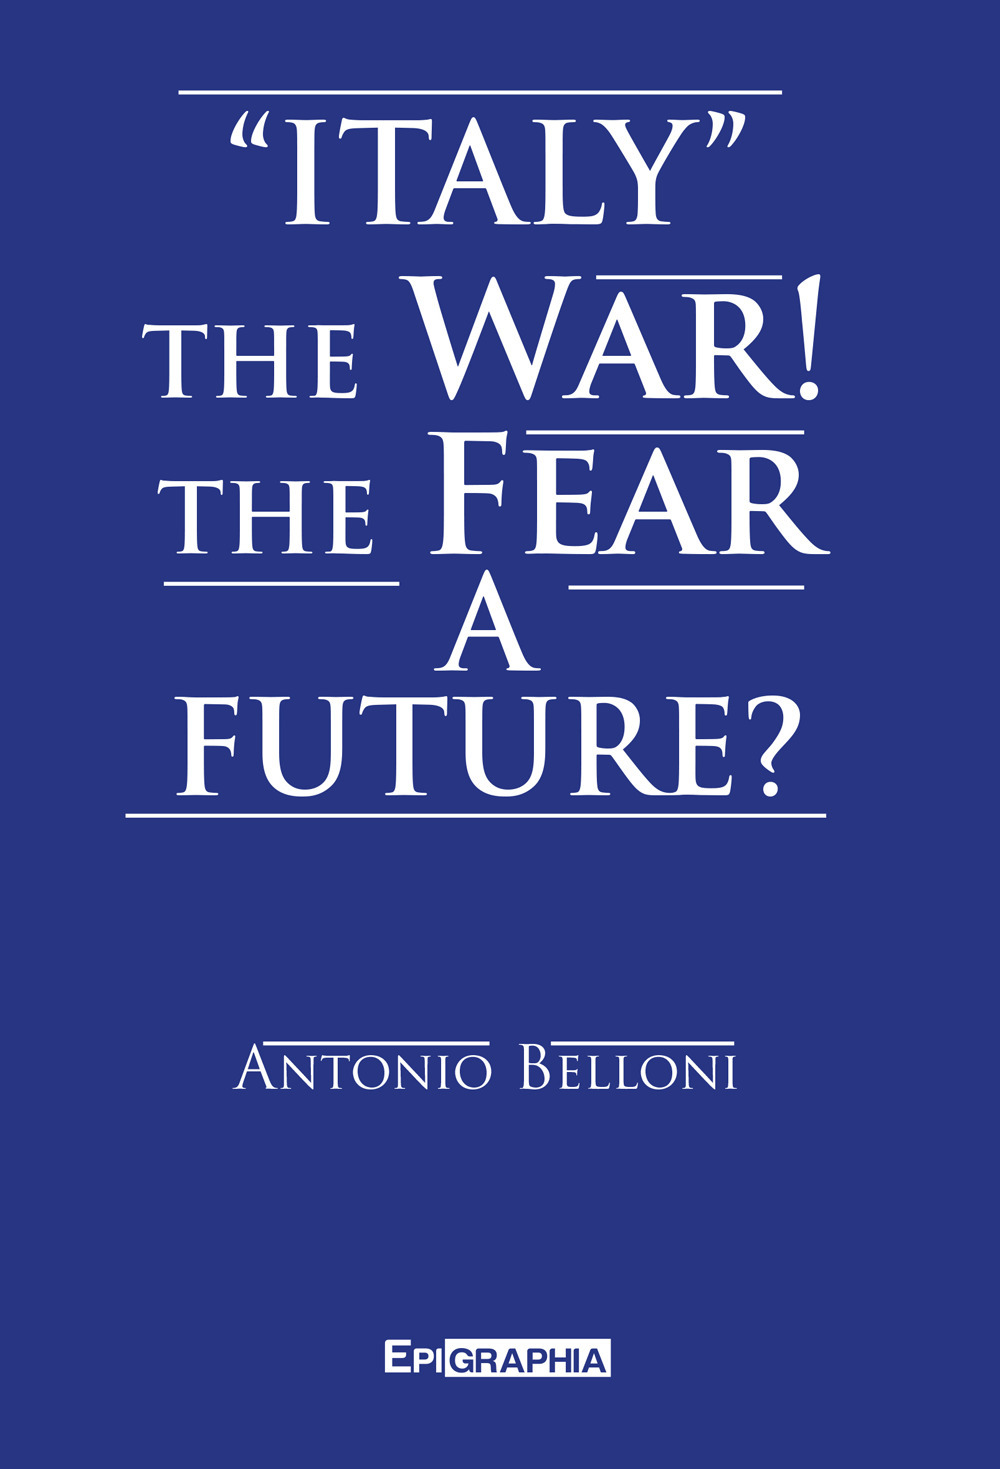 «Italy» the war! The fear a future?